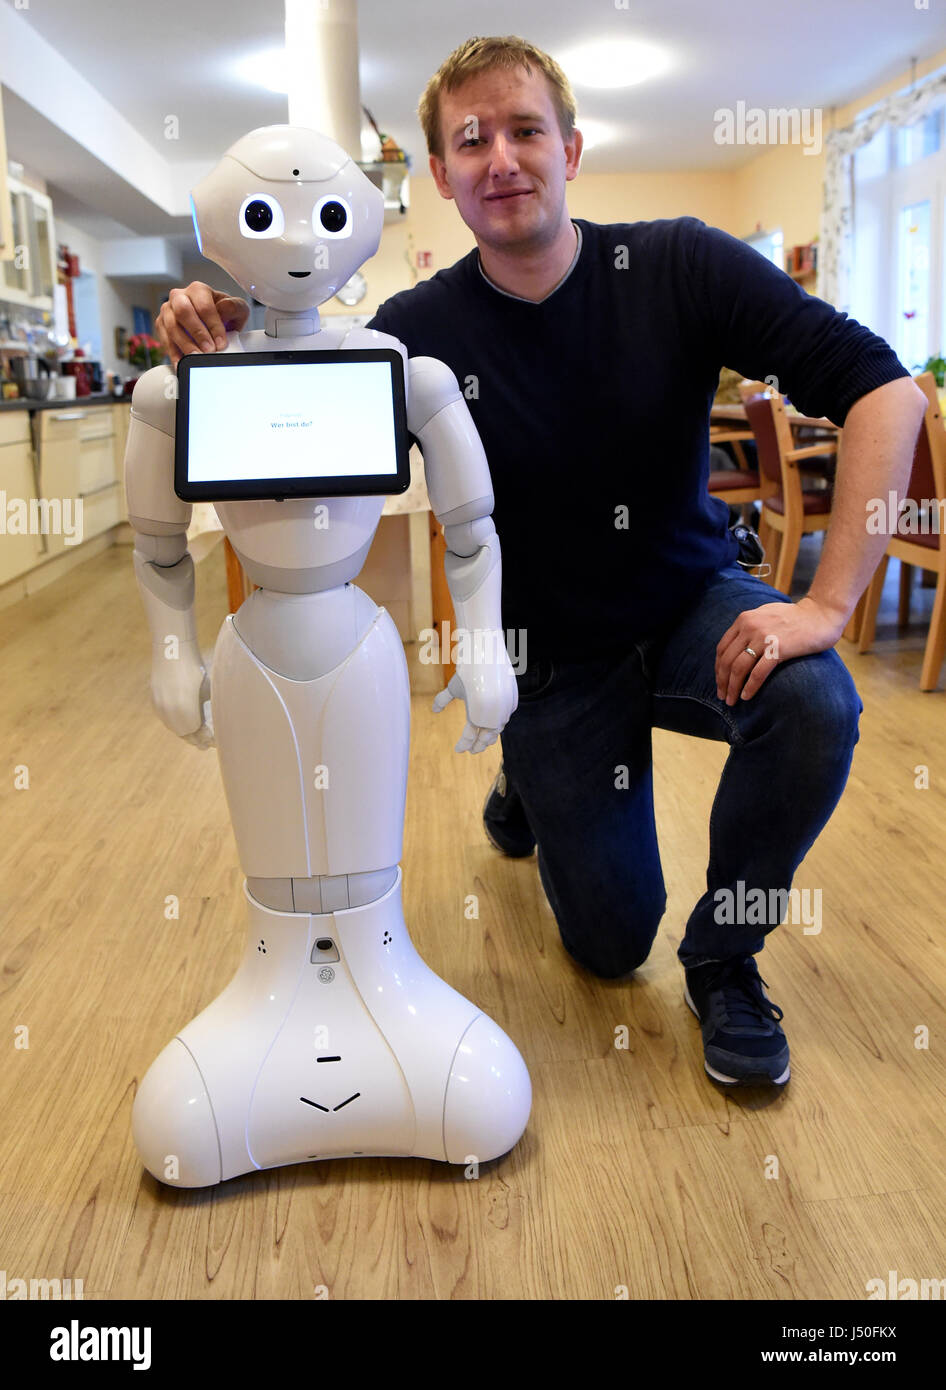 Kiel, Germany. 11th May, 2017. Robotics engineer Hannes Eilers from Kiel University of Applied Sciences kneeling beside 'Emma' the robot, which he programmed, in Kiel, Germany, 11 May 2017. The robot can speak, play music and take photographs of residents on demand. Photo: Carsten Rehder/dpa/Alamy Live News Stock Photo